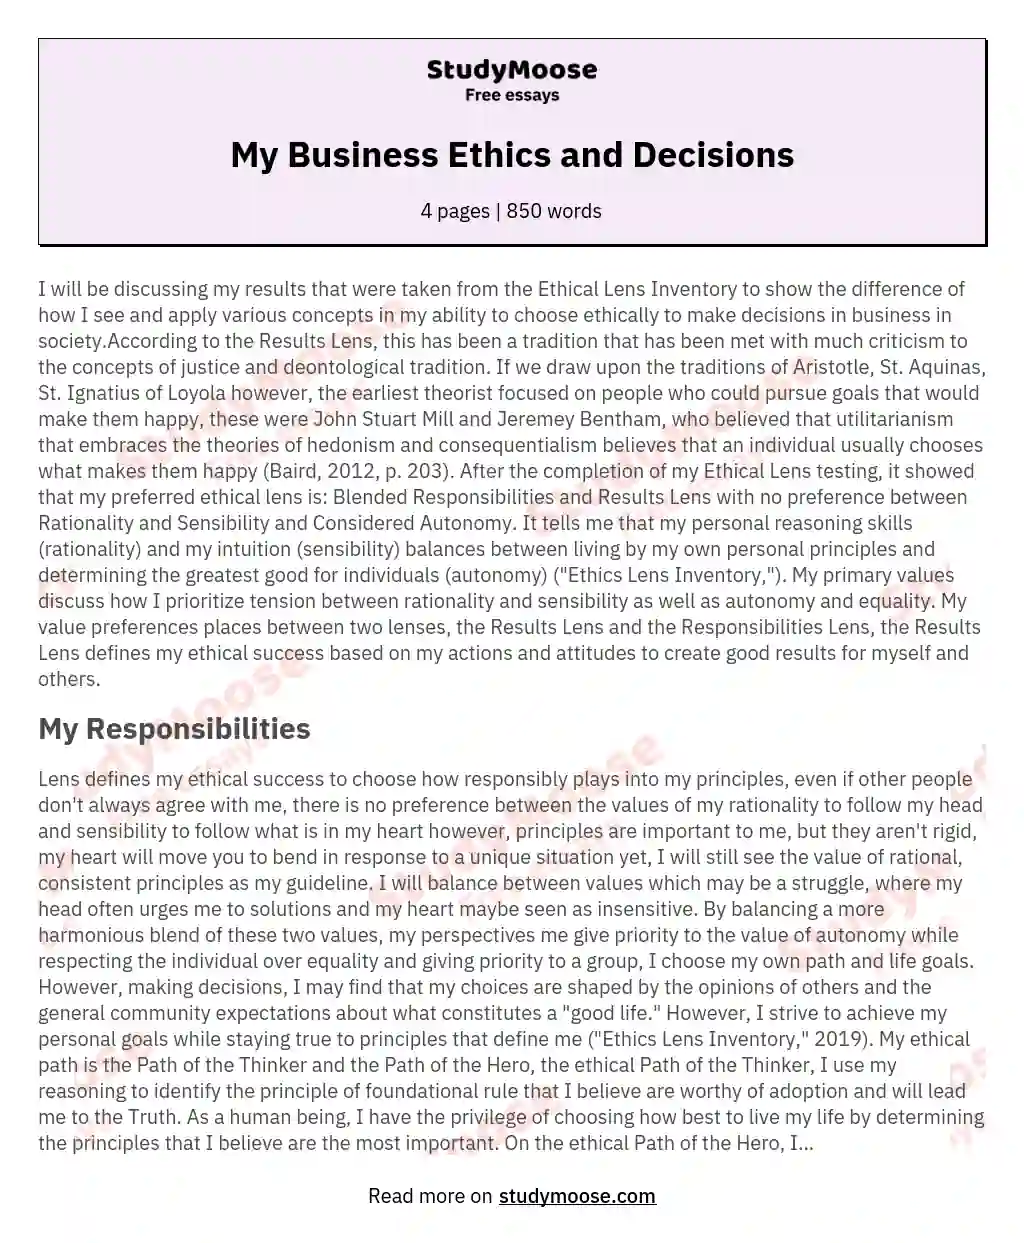 My Business Ethics and Decisions essay